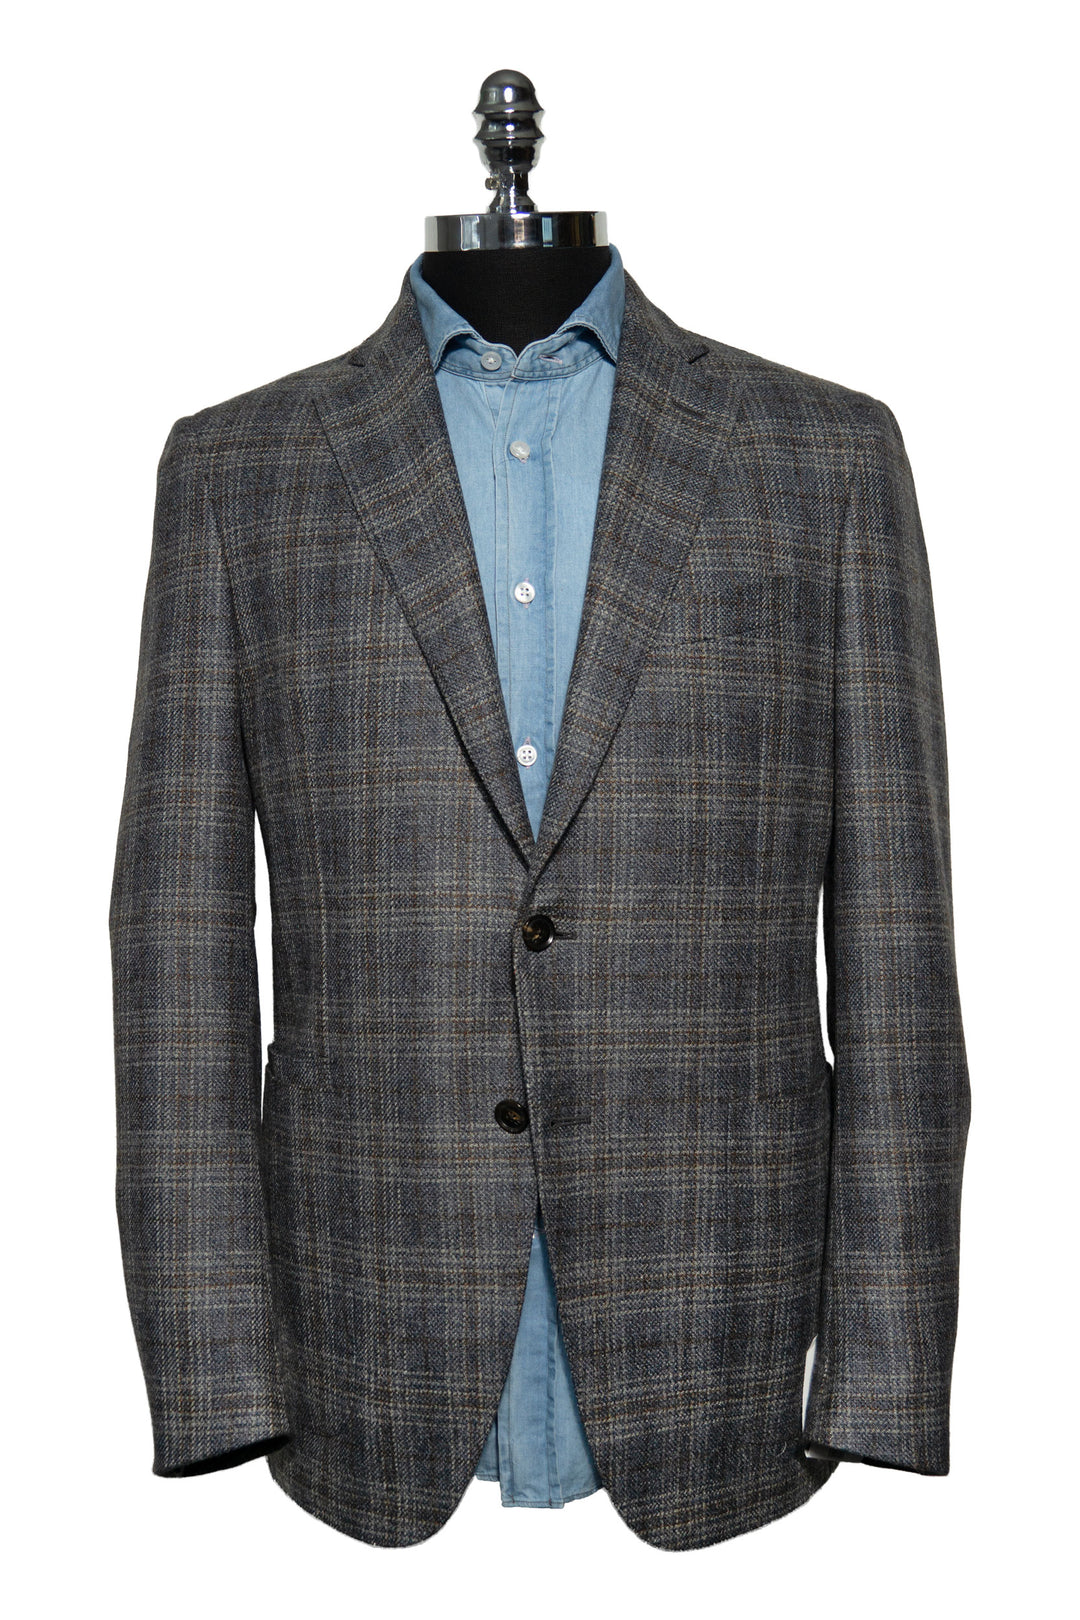 Luciano Barbera Grey Blue with Rust Plaid Wool Jacket